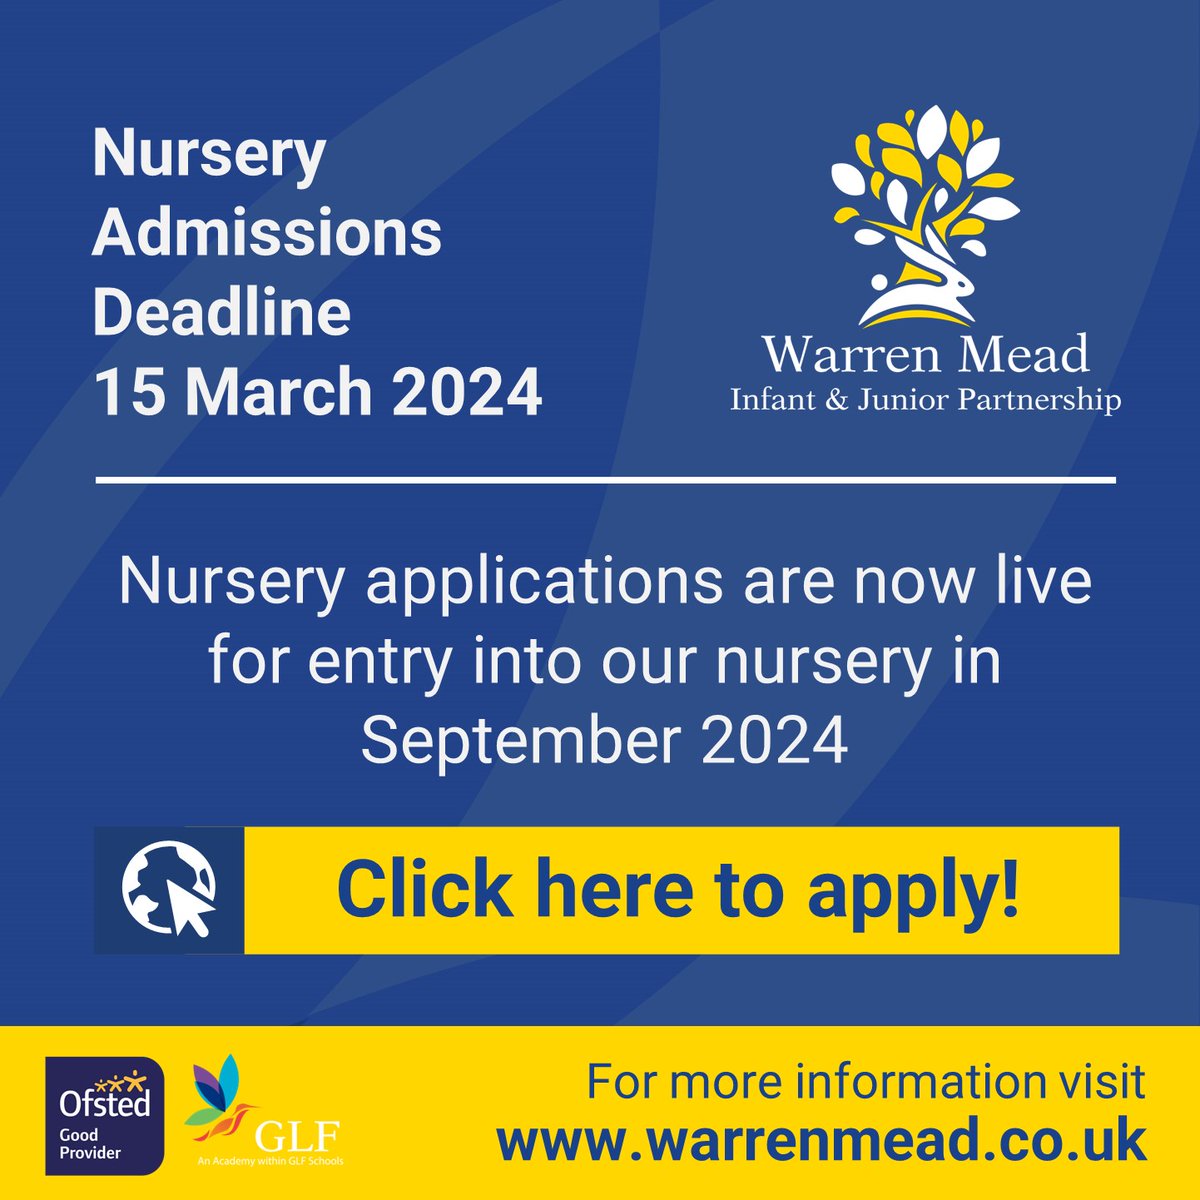 NURSERY APPLICATIONS ARE NOW LIVE! You have until the 15th March 2024 to apply for a space at our incredible Warren Mead Nursery! To arrange a tour or apply for a space, please visit the link in our bio.